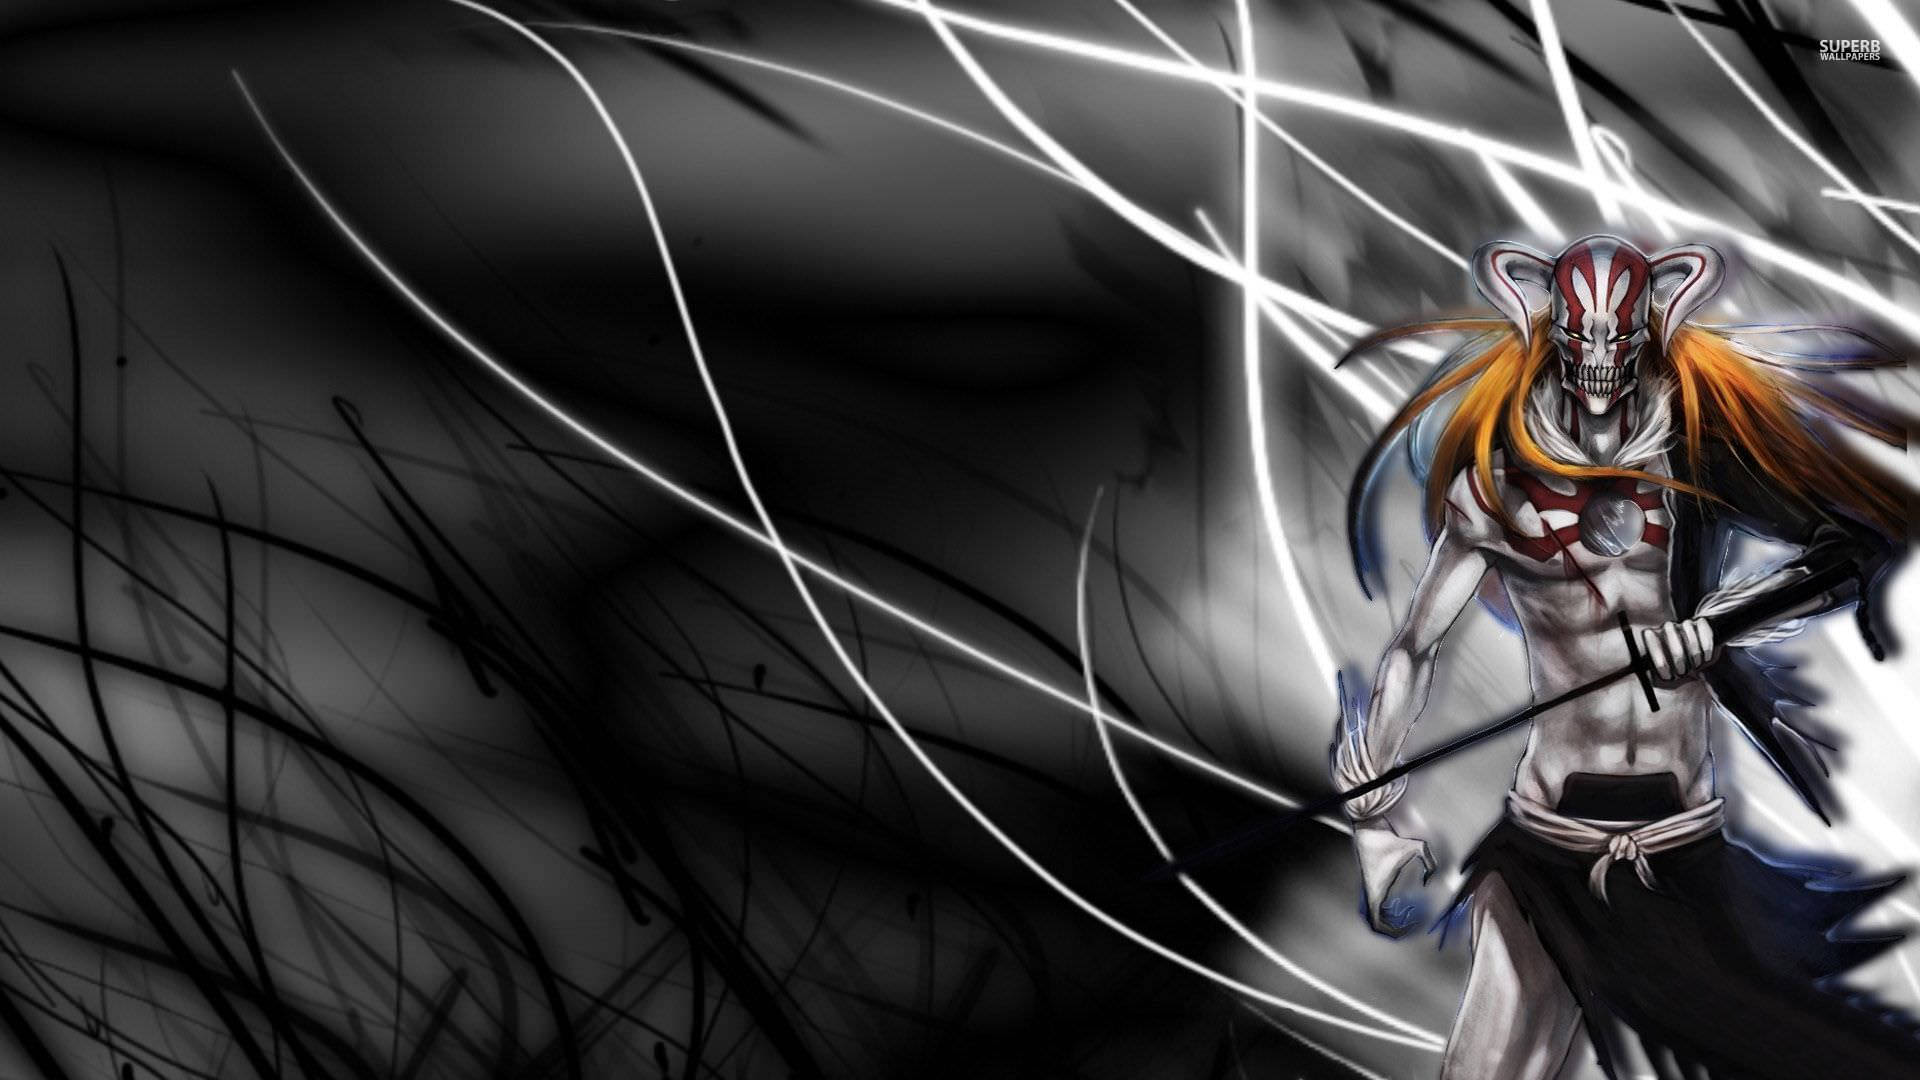 Meet the Vasto Lordes, The Powerful Attackers of Bleach Wallpaper